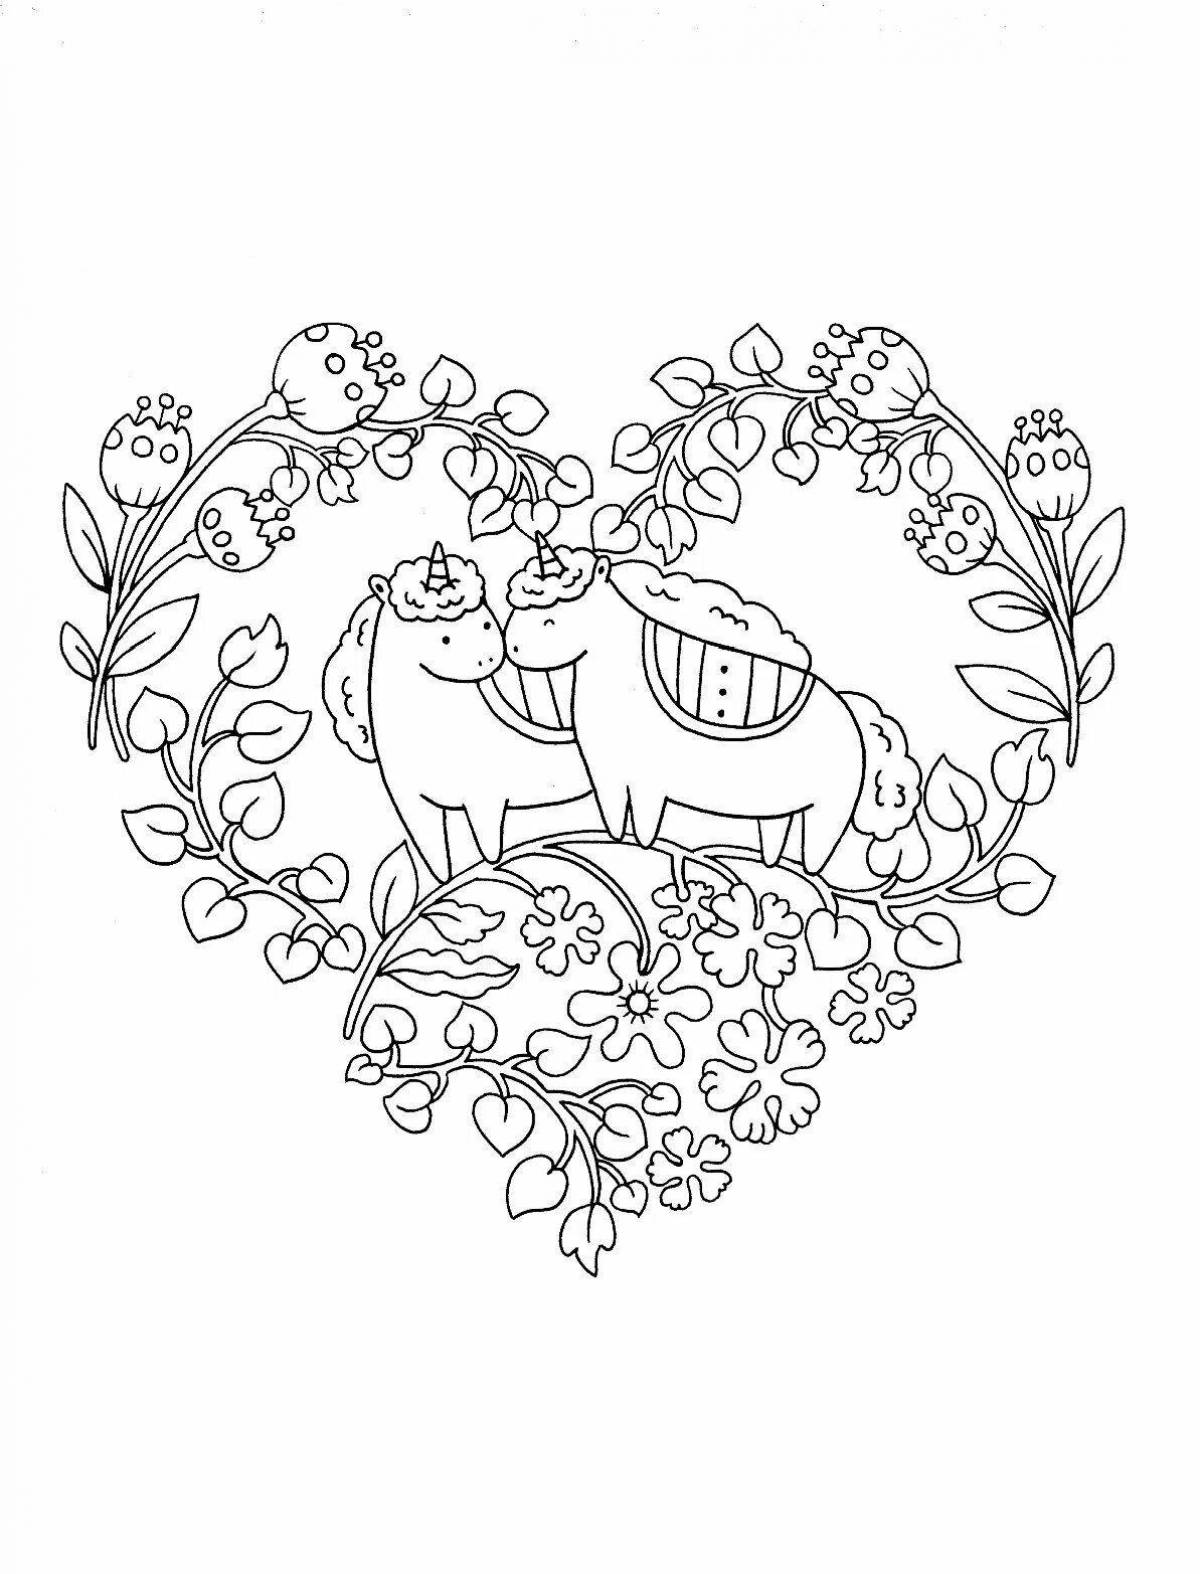 Million bears cozy coloring page